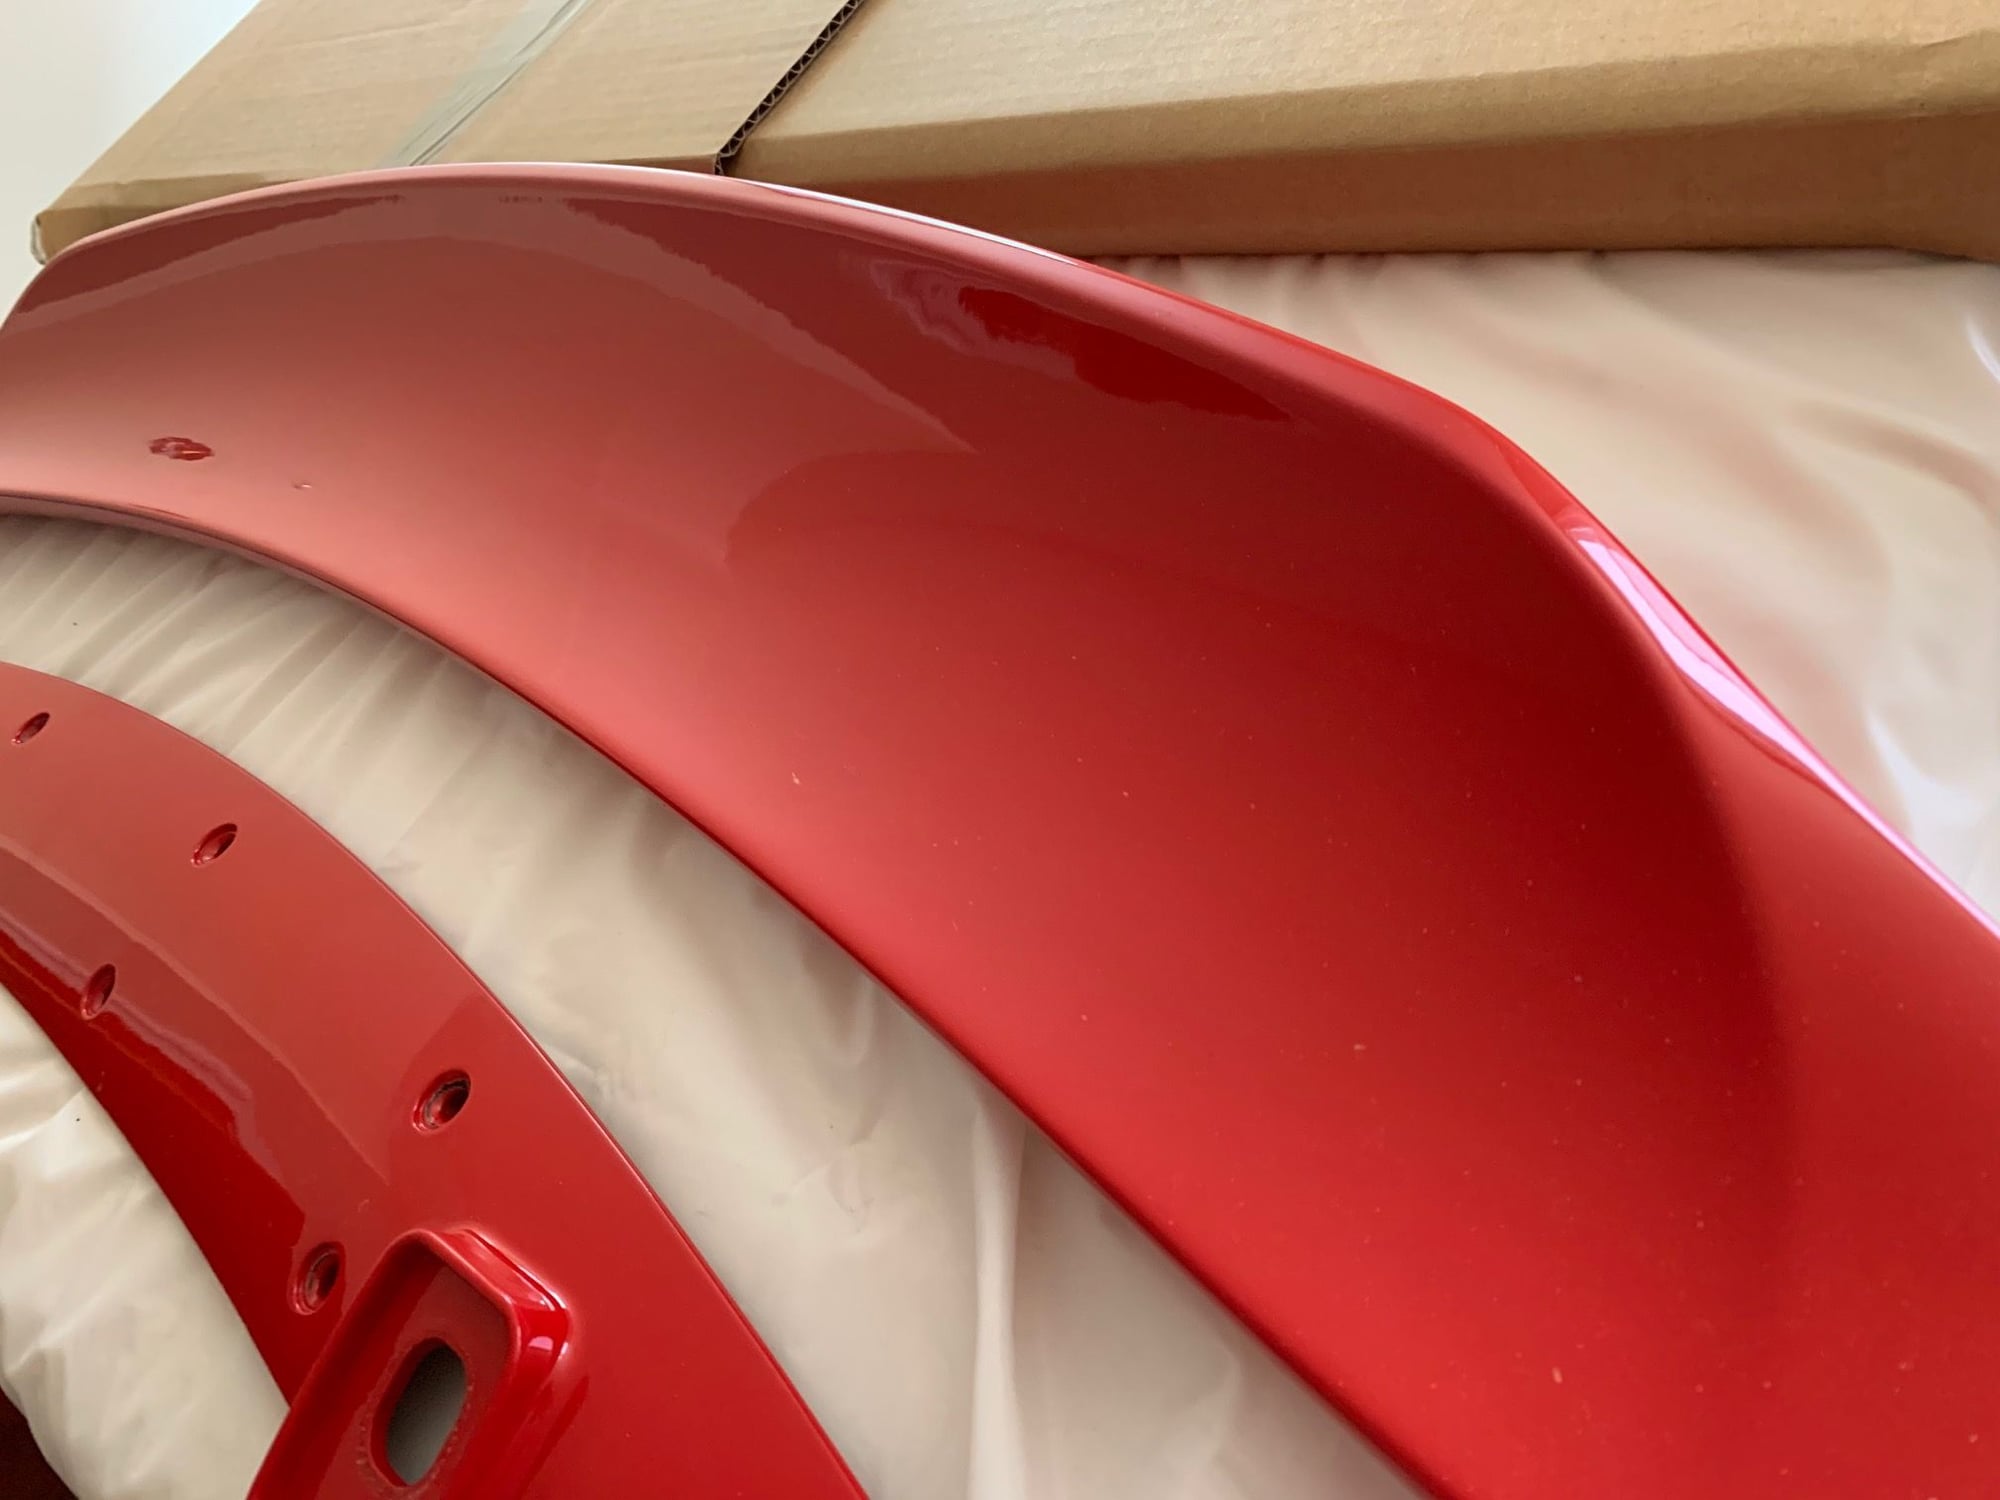 Exterior Body Parts - 981 Spyder/GT4 Ducktail Lip (Guards Red) - New - 2013 to 2016 Porsche Cayman - New York, NY 11357, United States